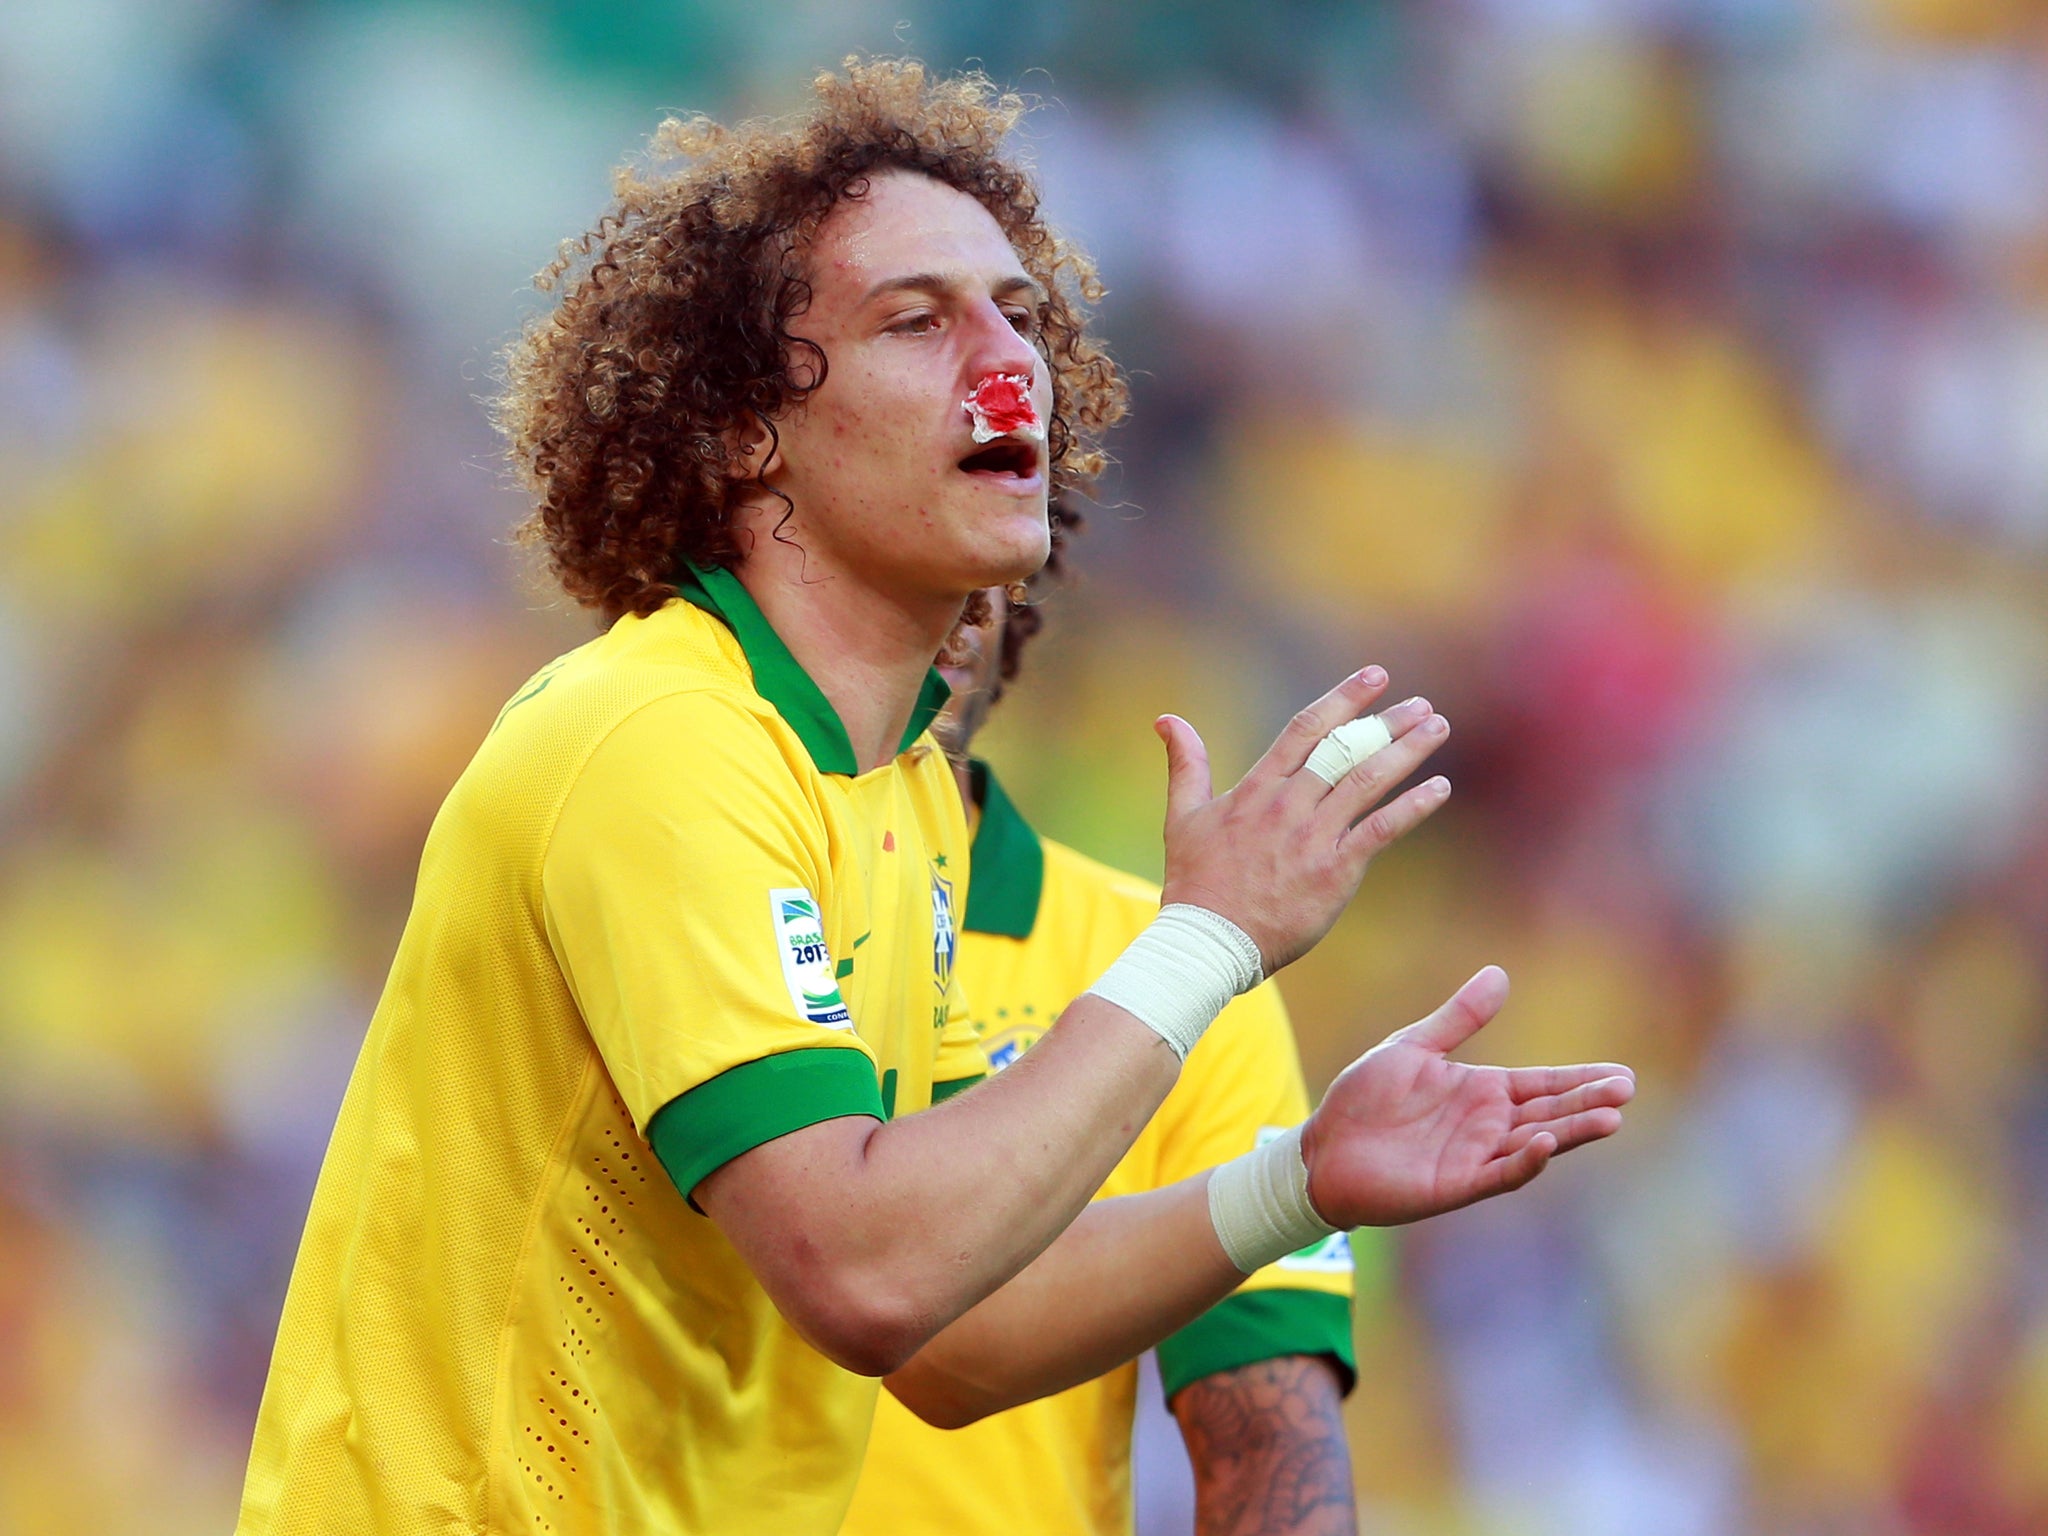 David Luiz in action for Brazil after he suffered a broken nose